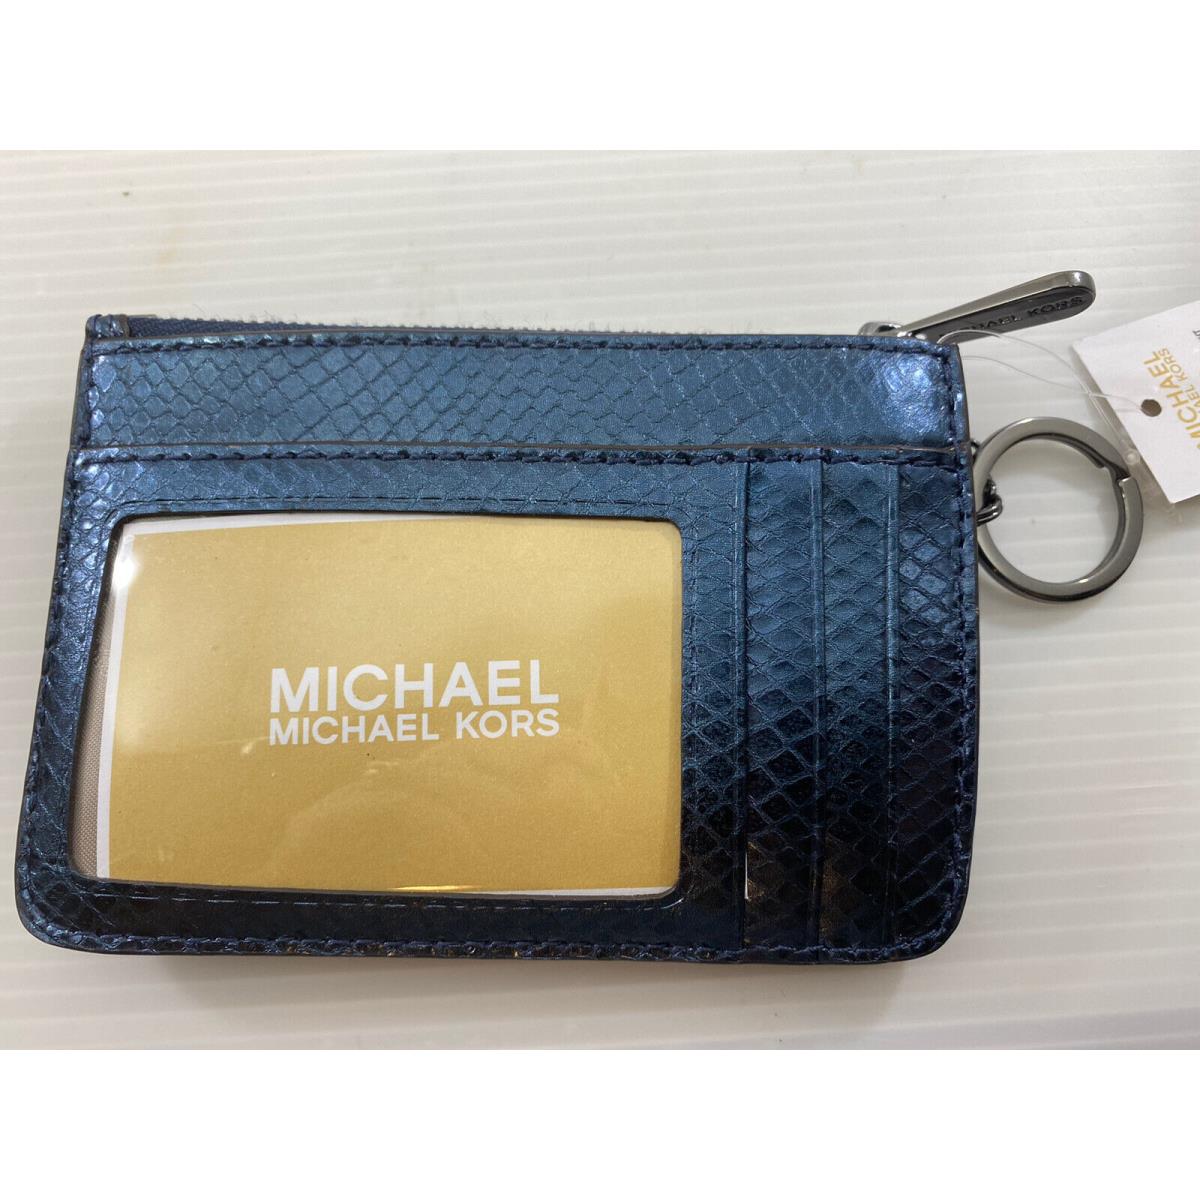 Michael Kors Adele Small Leather Top Zip Coin Pouch with ID